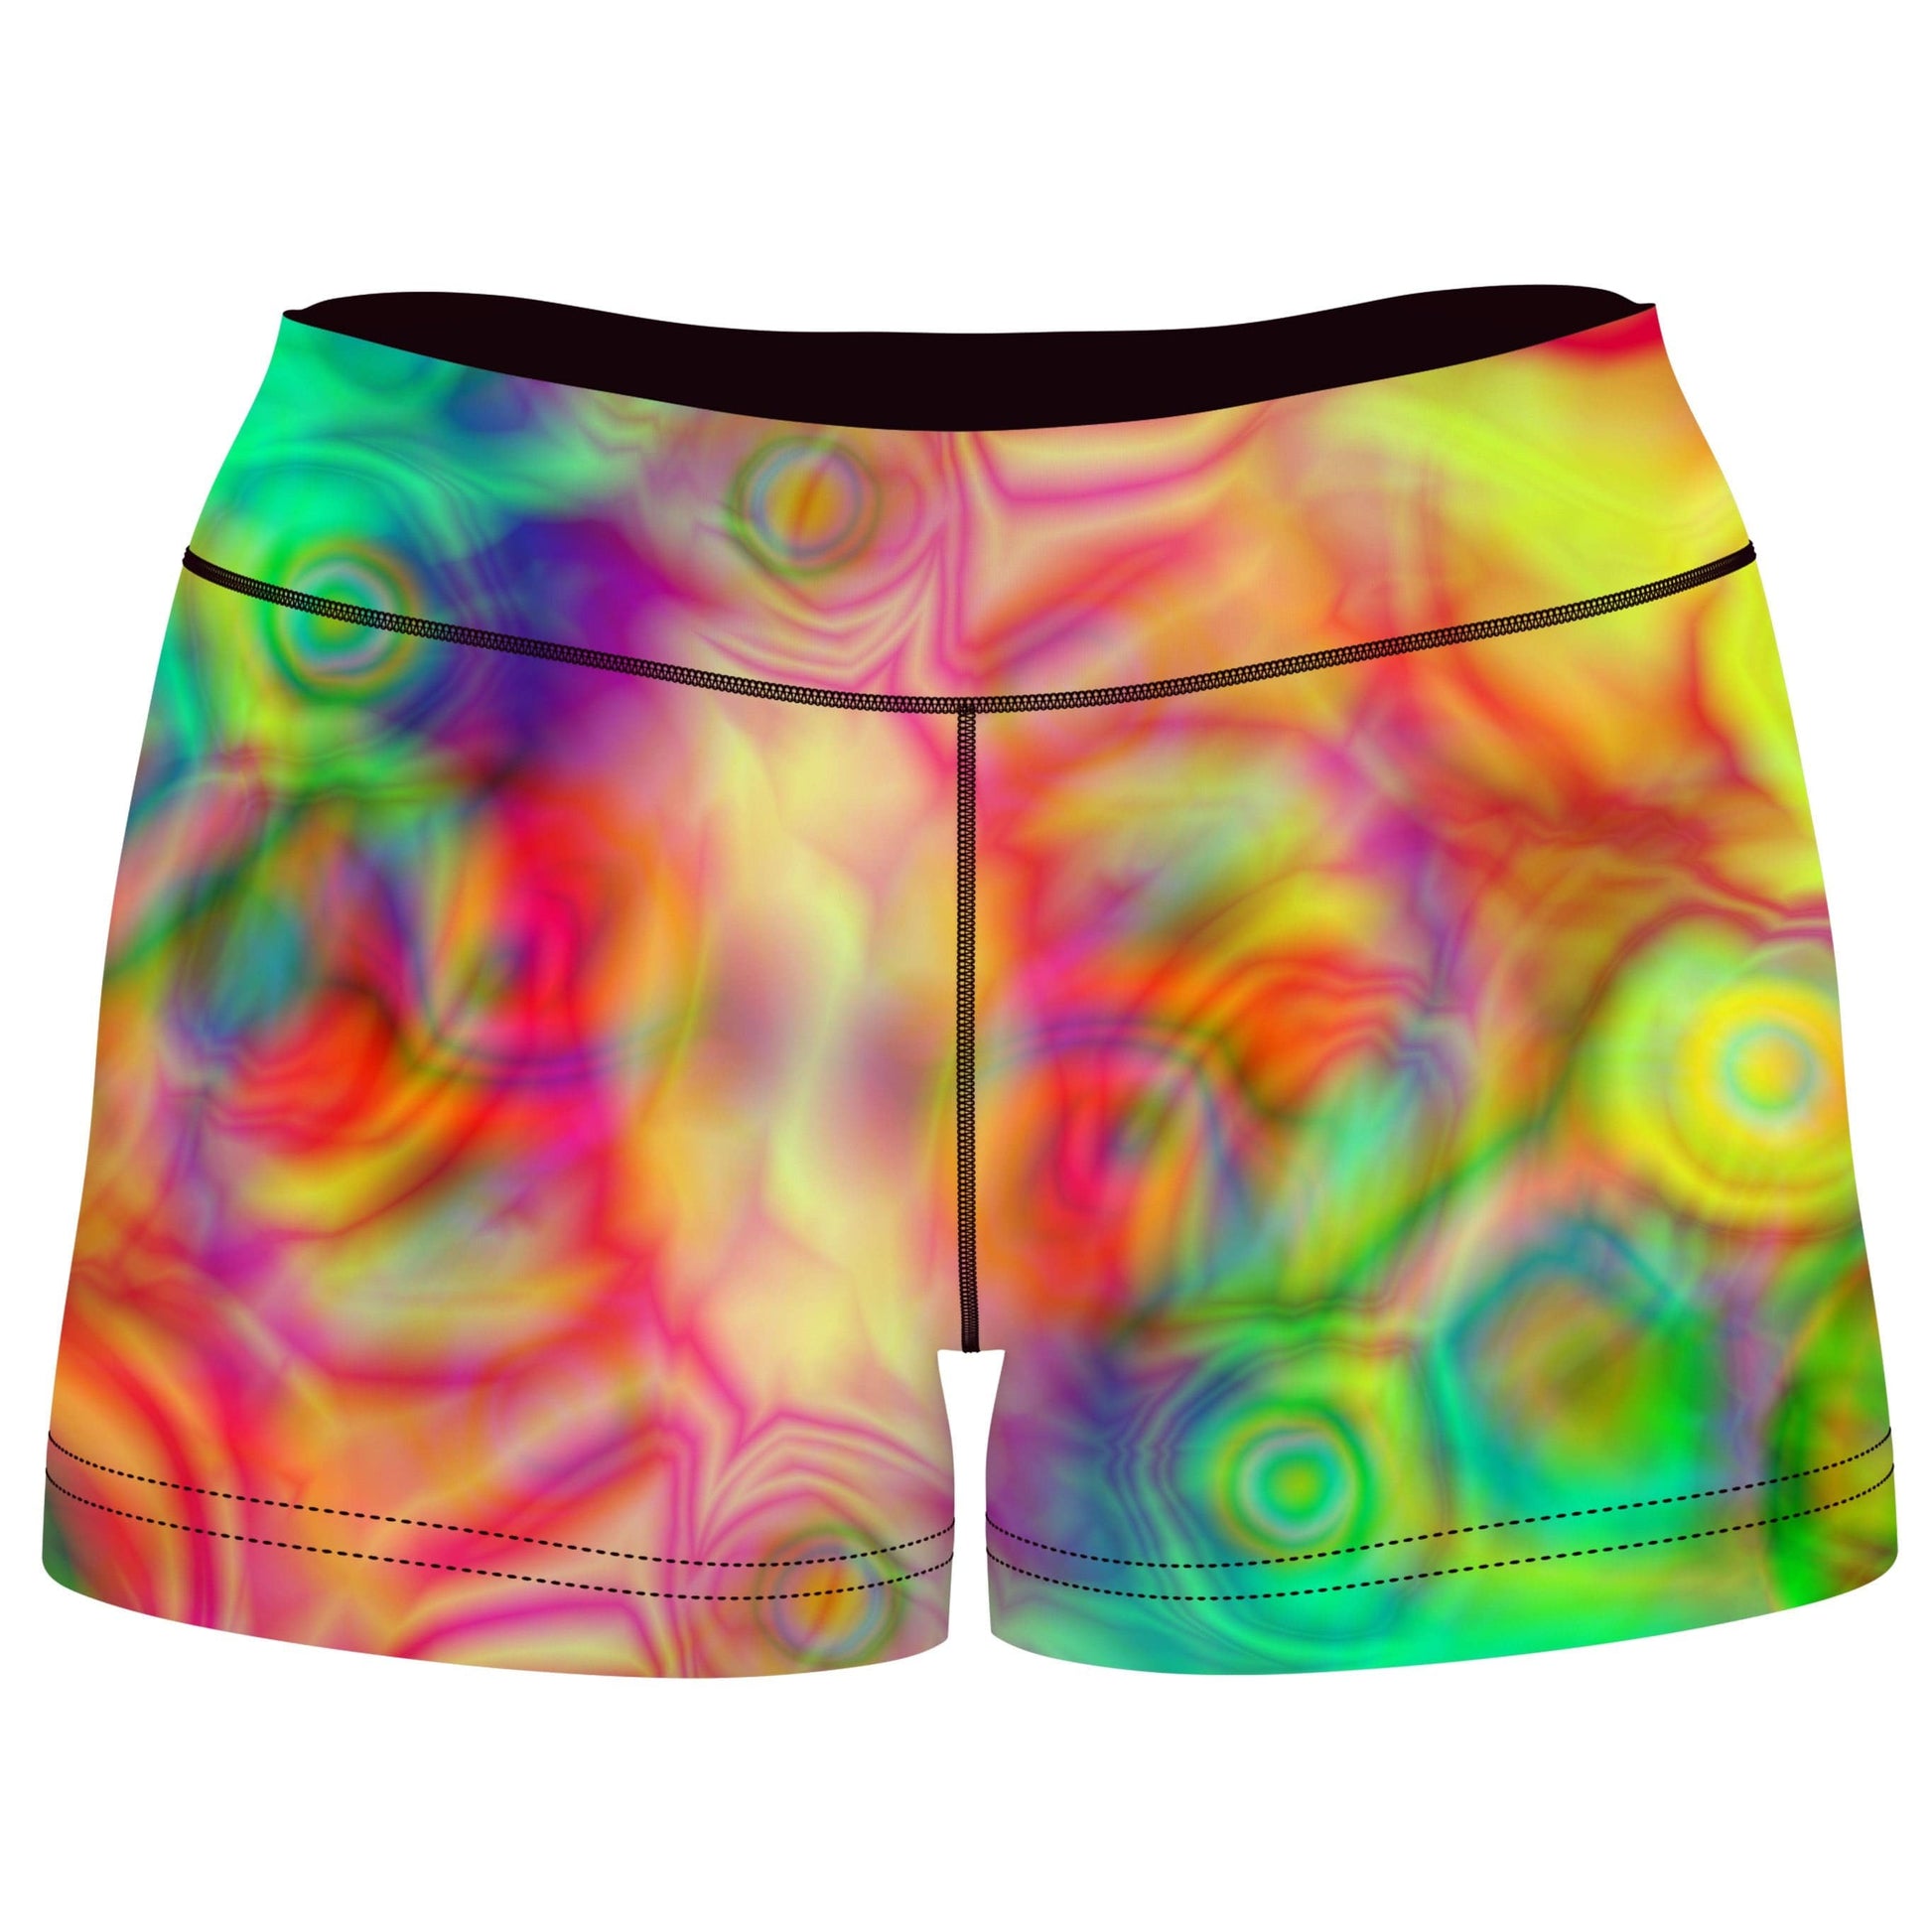 Psychedelic Dream High-Waisted Women's Shorts, Yantrart Design, | iEDM